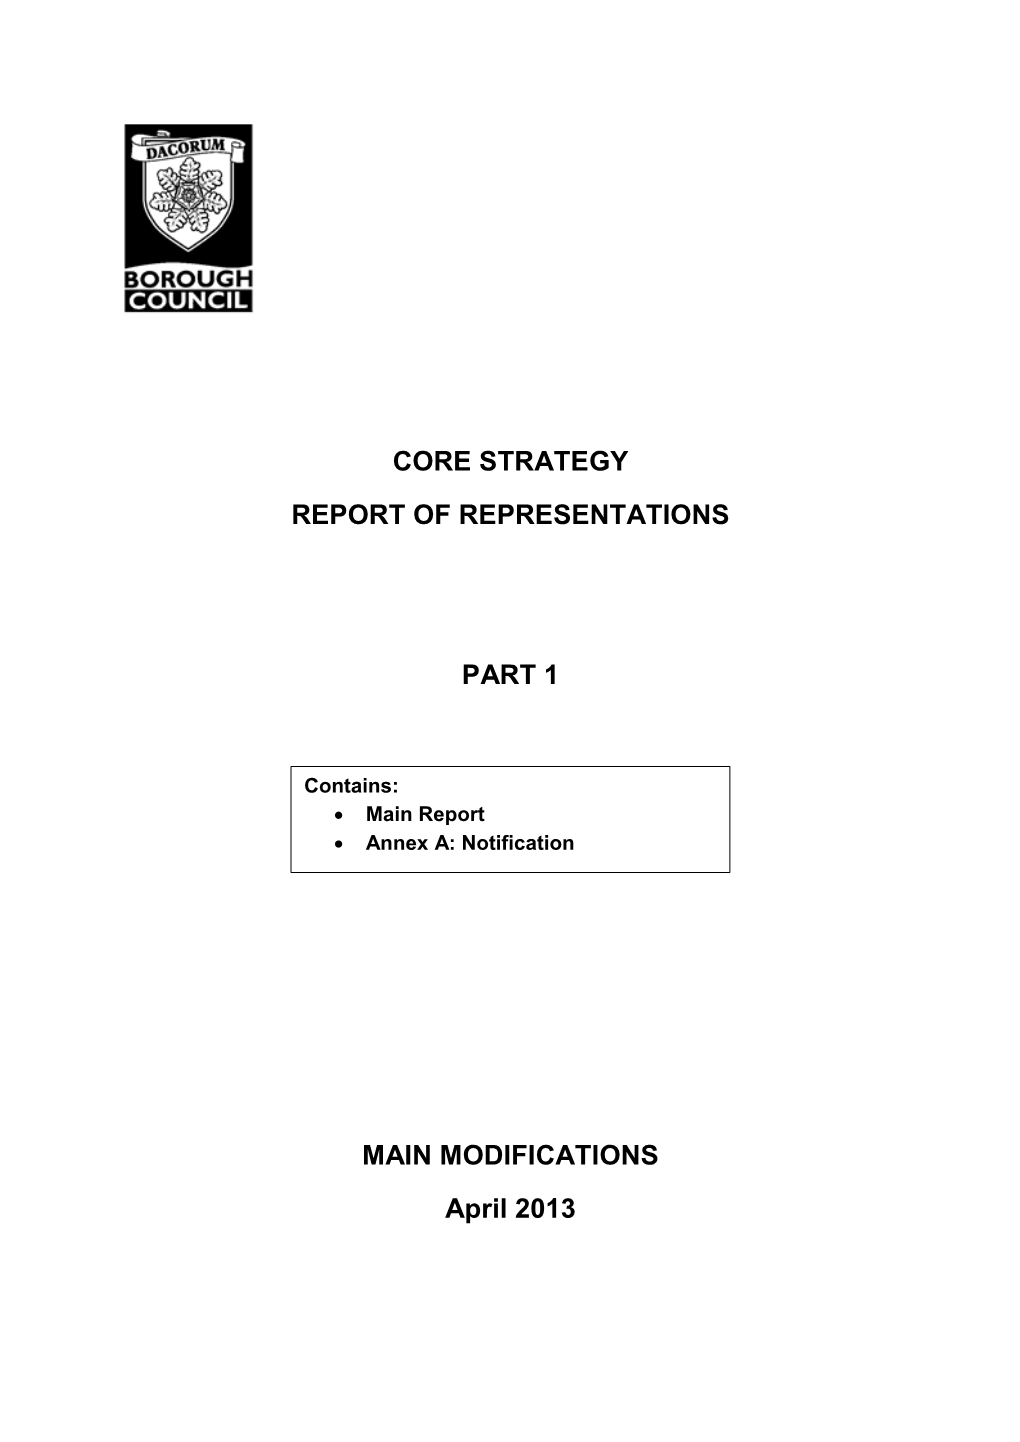 Core Strategy Report of Representations Part 1